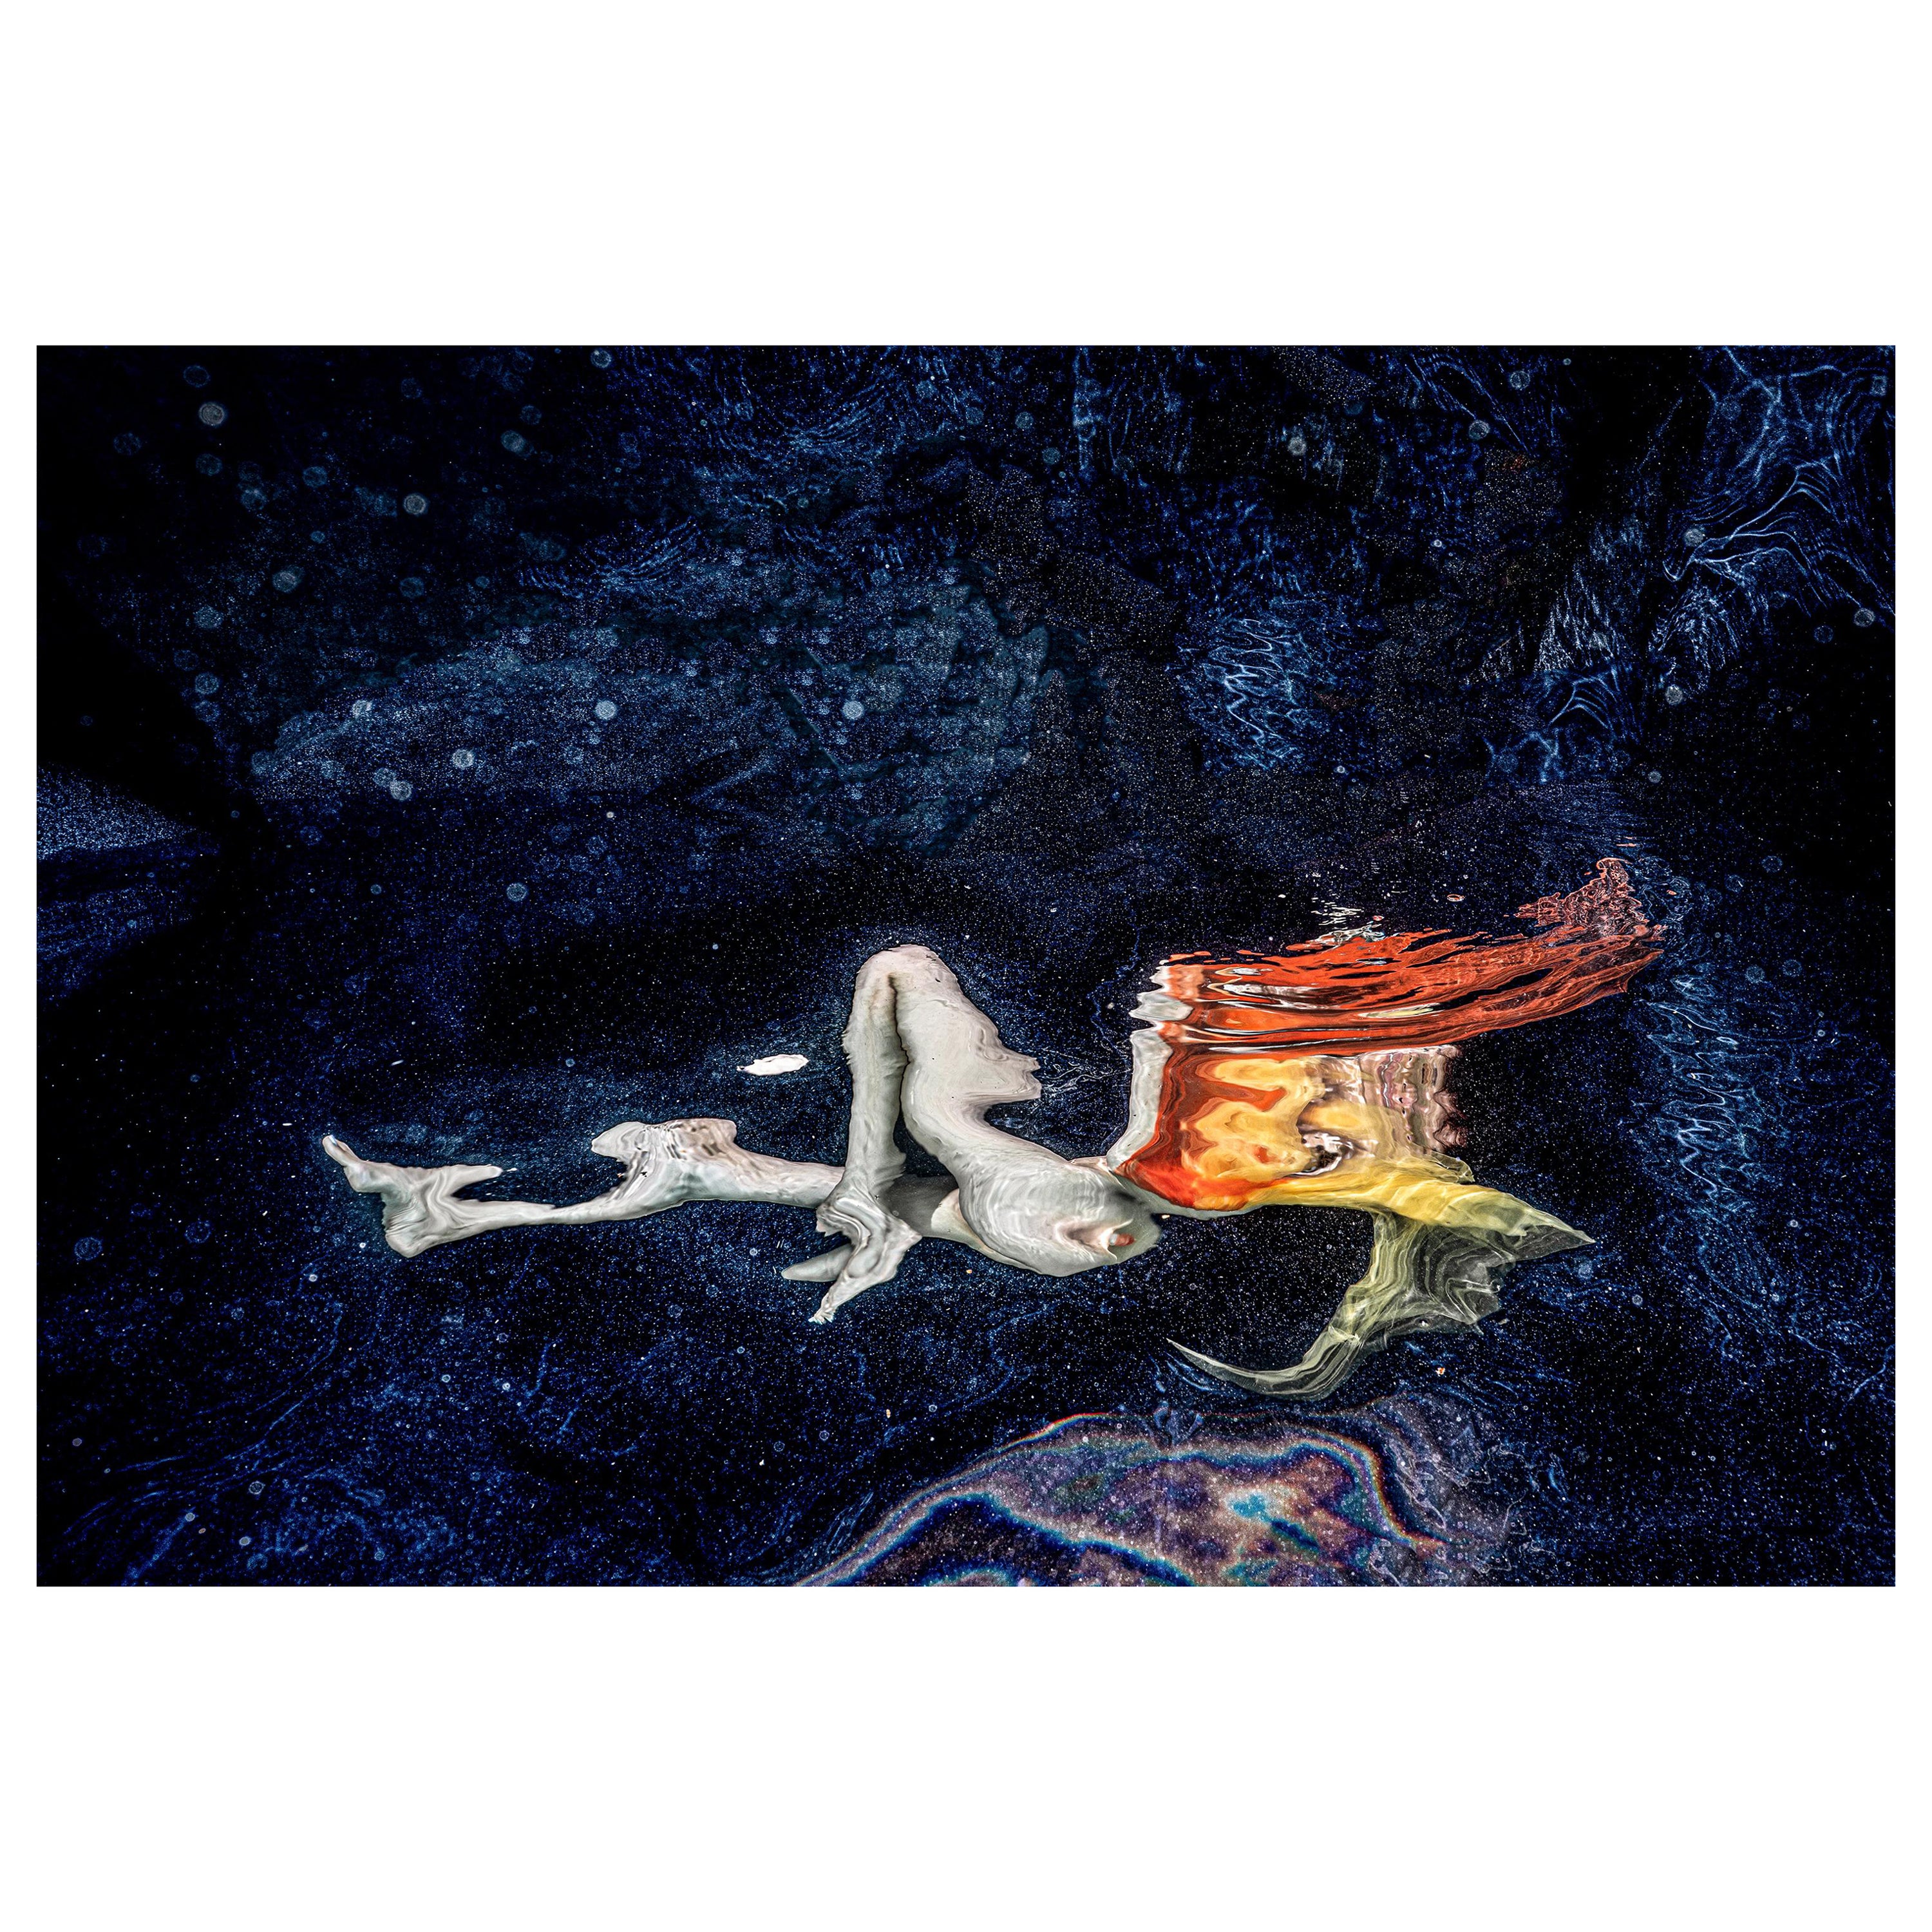 Alex Sher Color Photograph - Astrologist - photograph of an underwater reflection - archival print 23x35"